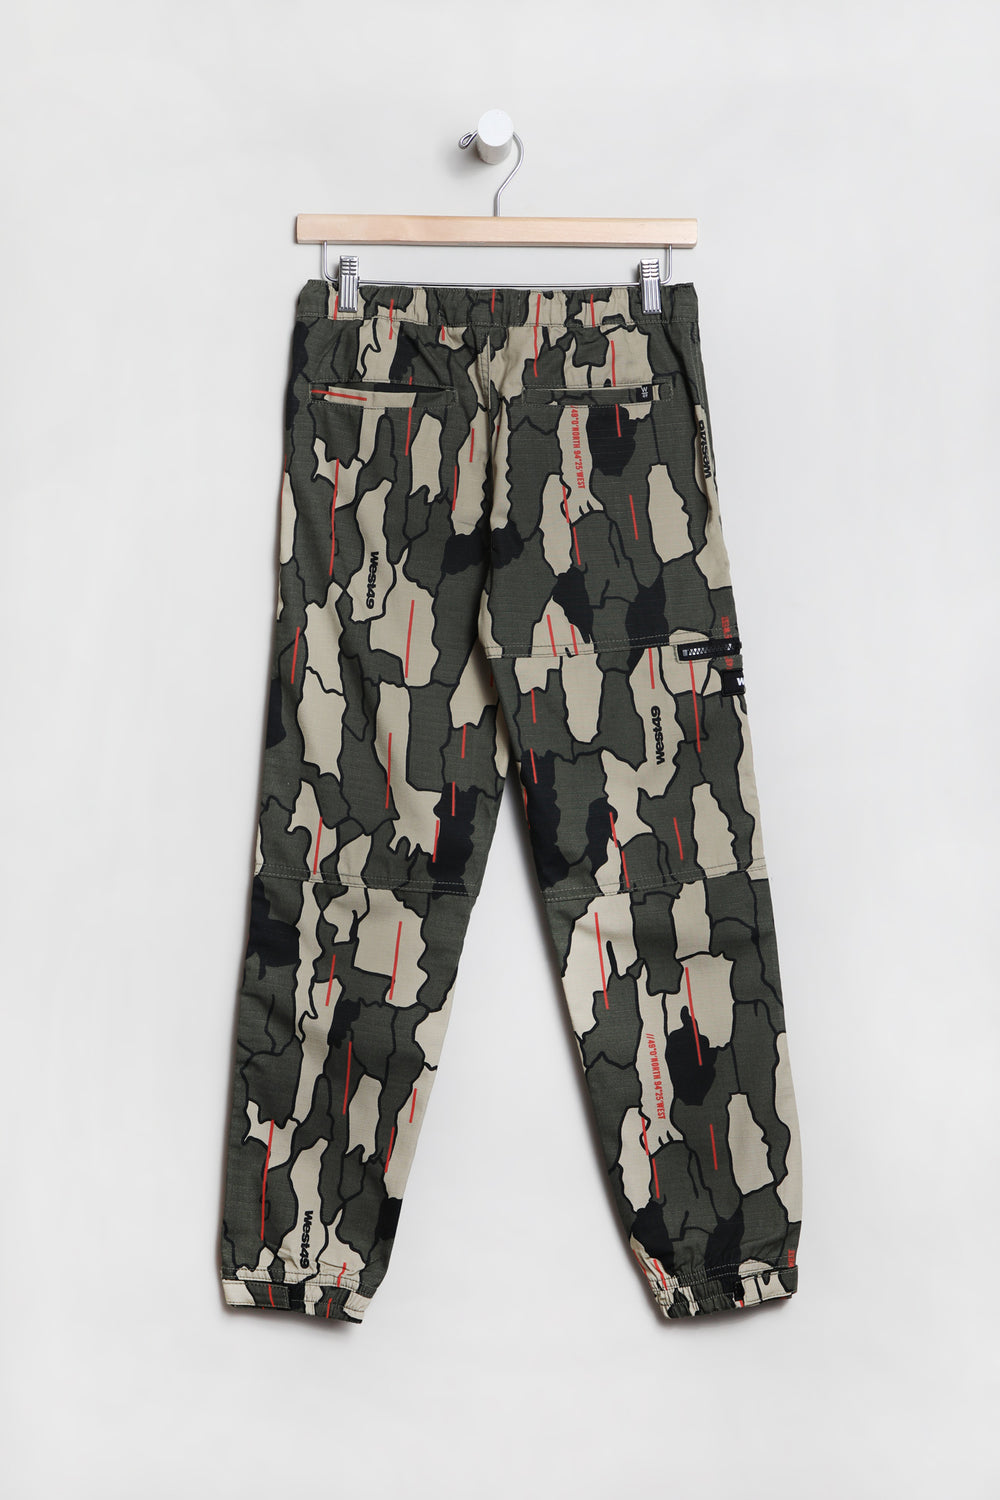 Jogger Ripstop Camouflage Montagne West49 Junior Camoufle